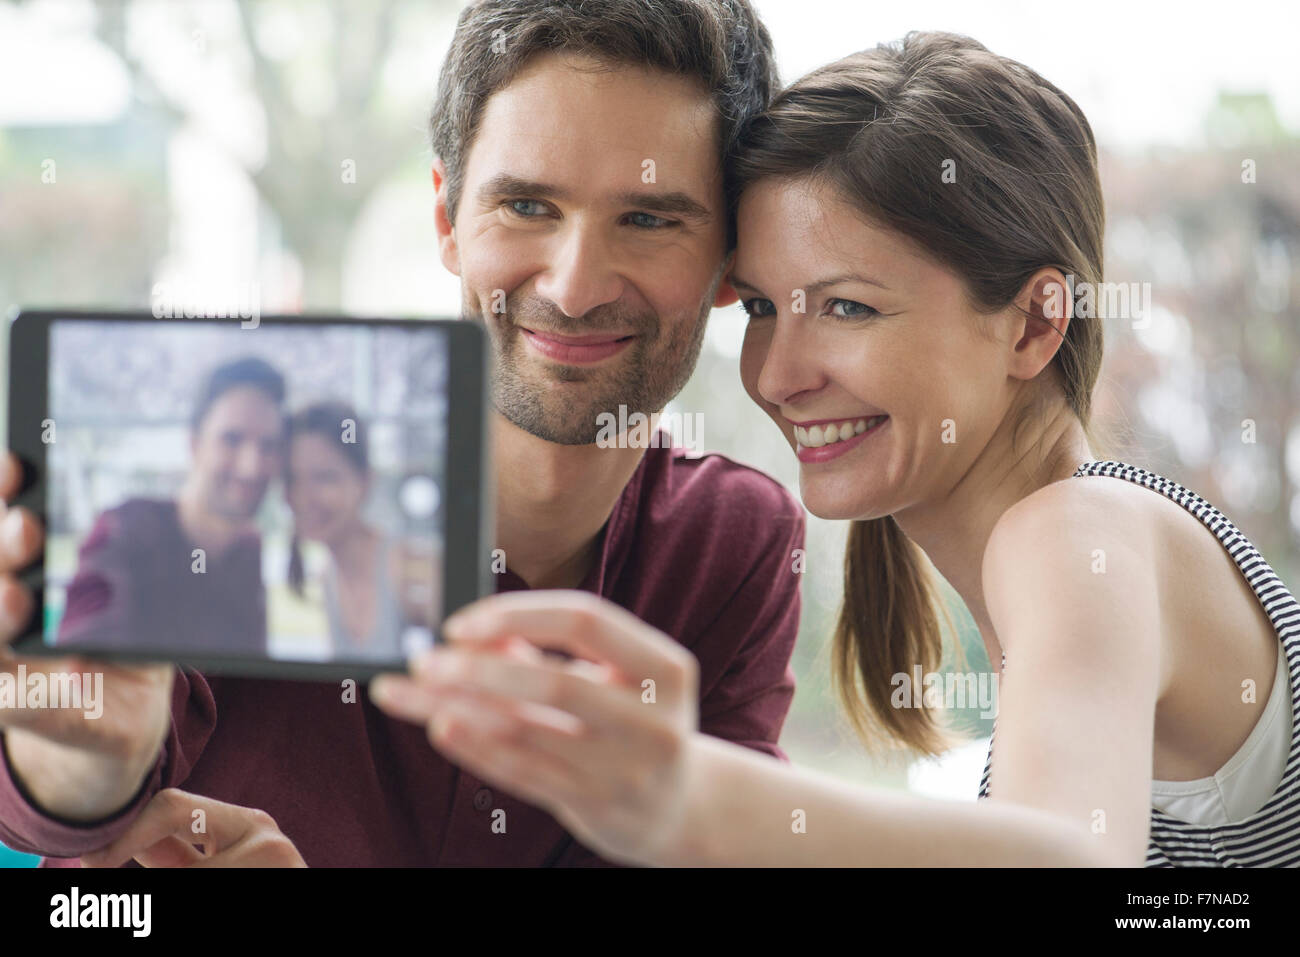 Couple using digital tablet to take a selfie Stock Photo